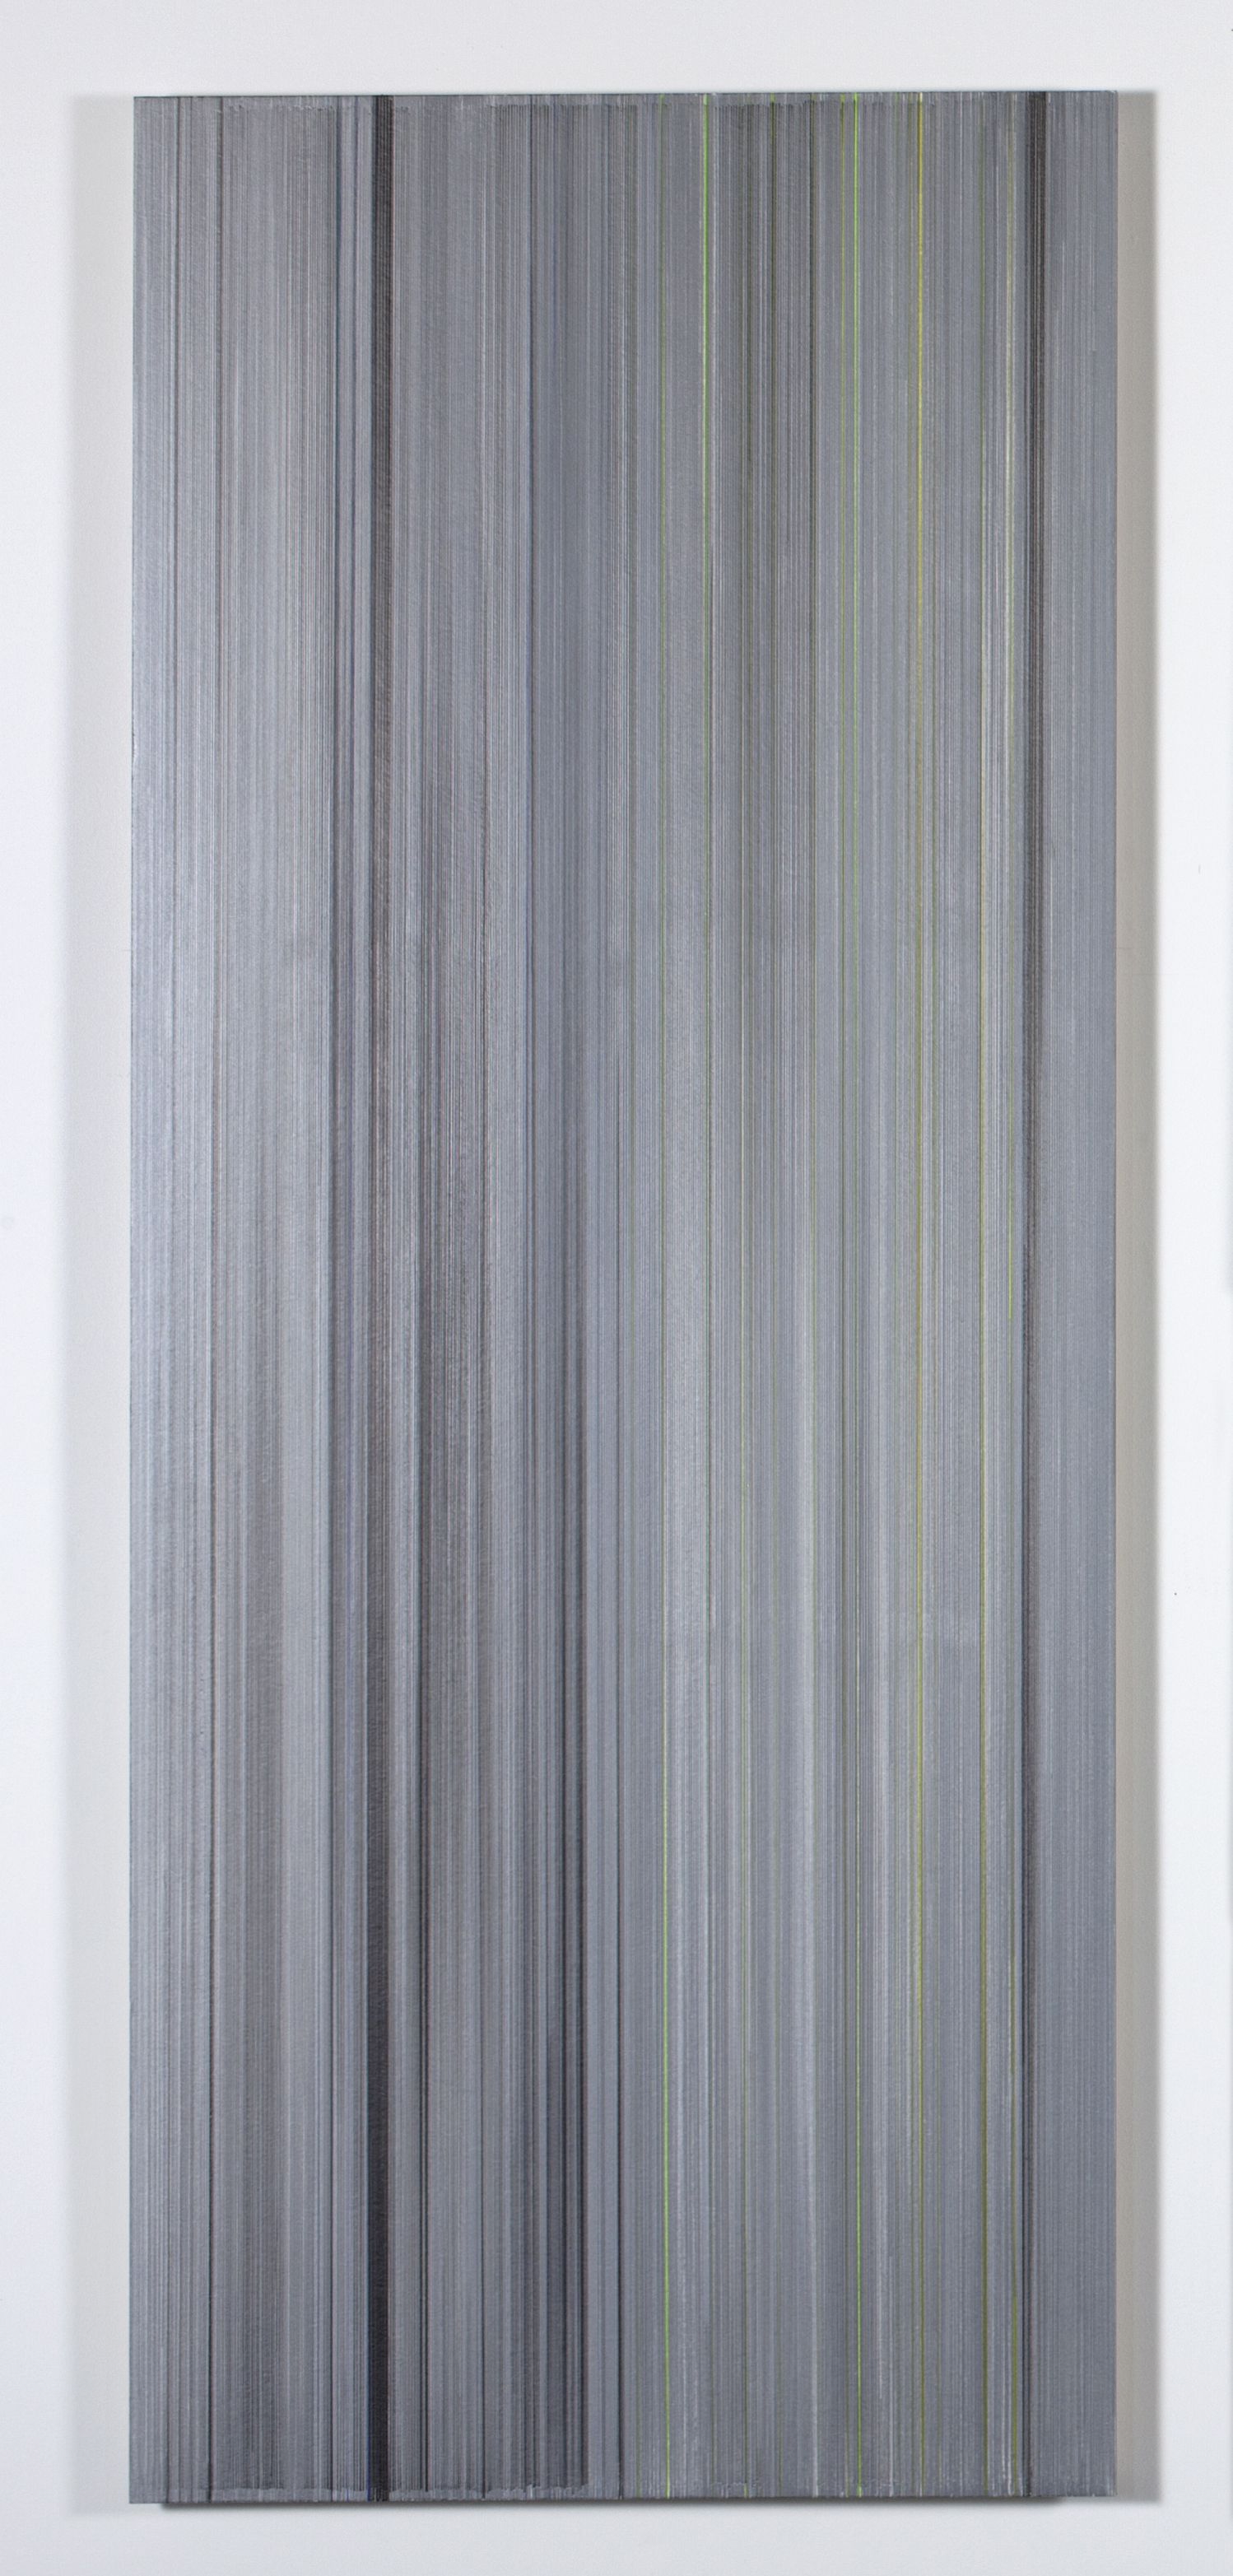    I text you about the moon   2016 graphite and colored pencil on mat board 50 x 24 inches 